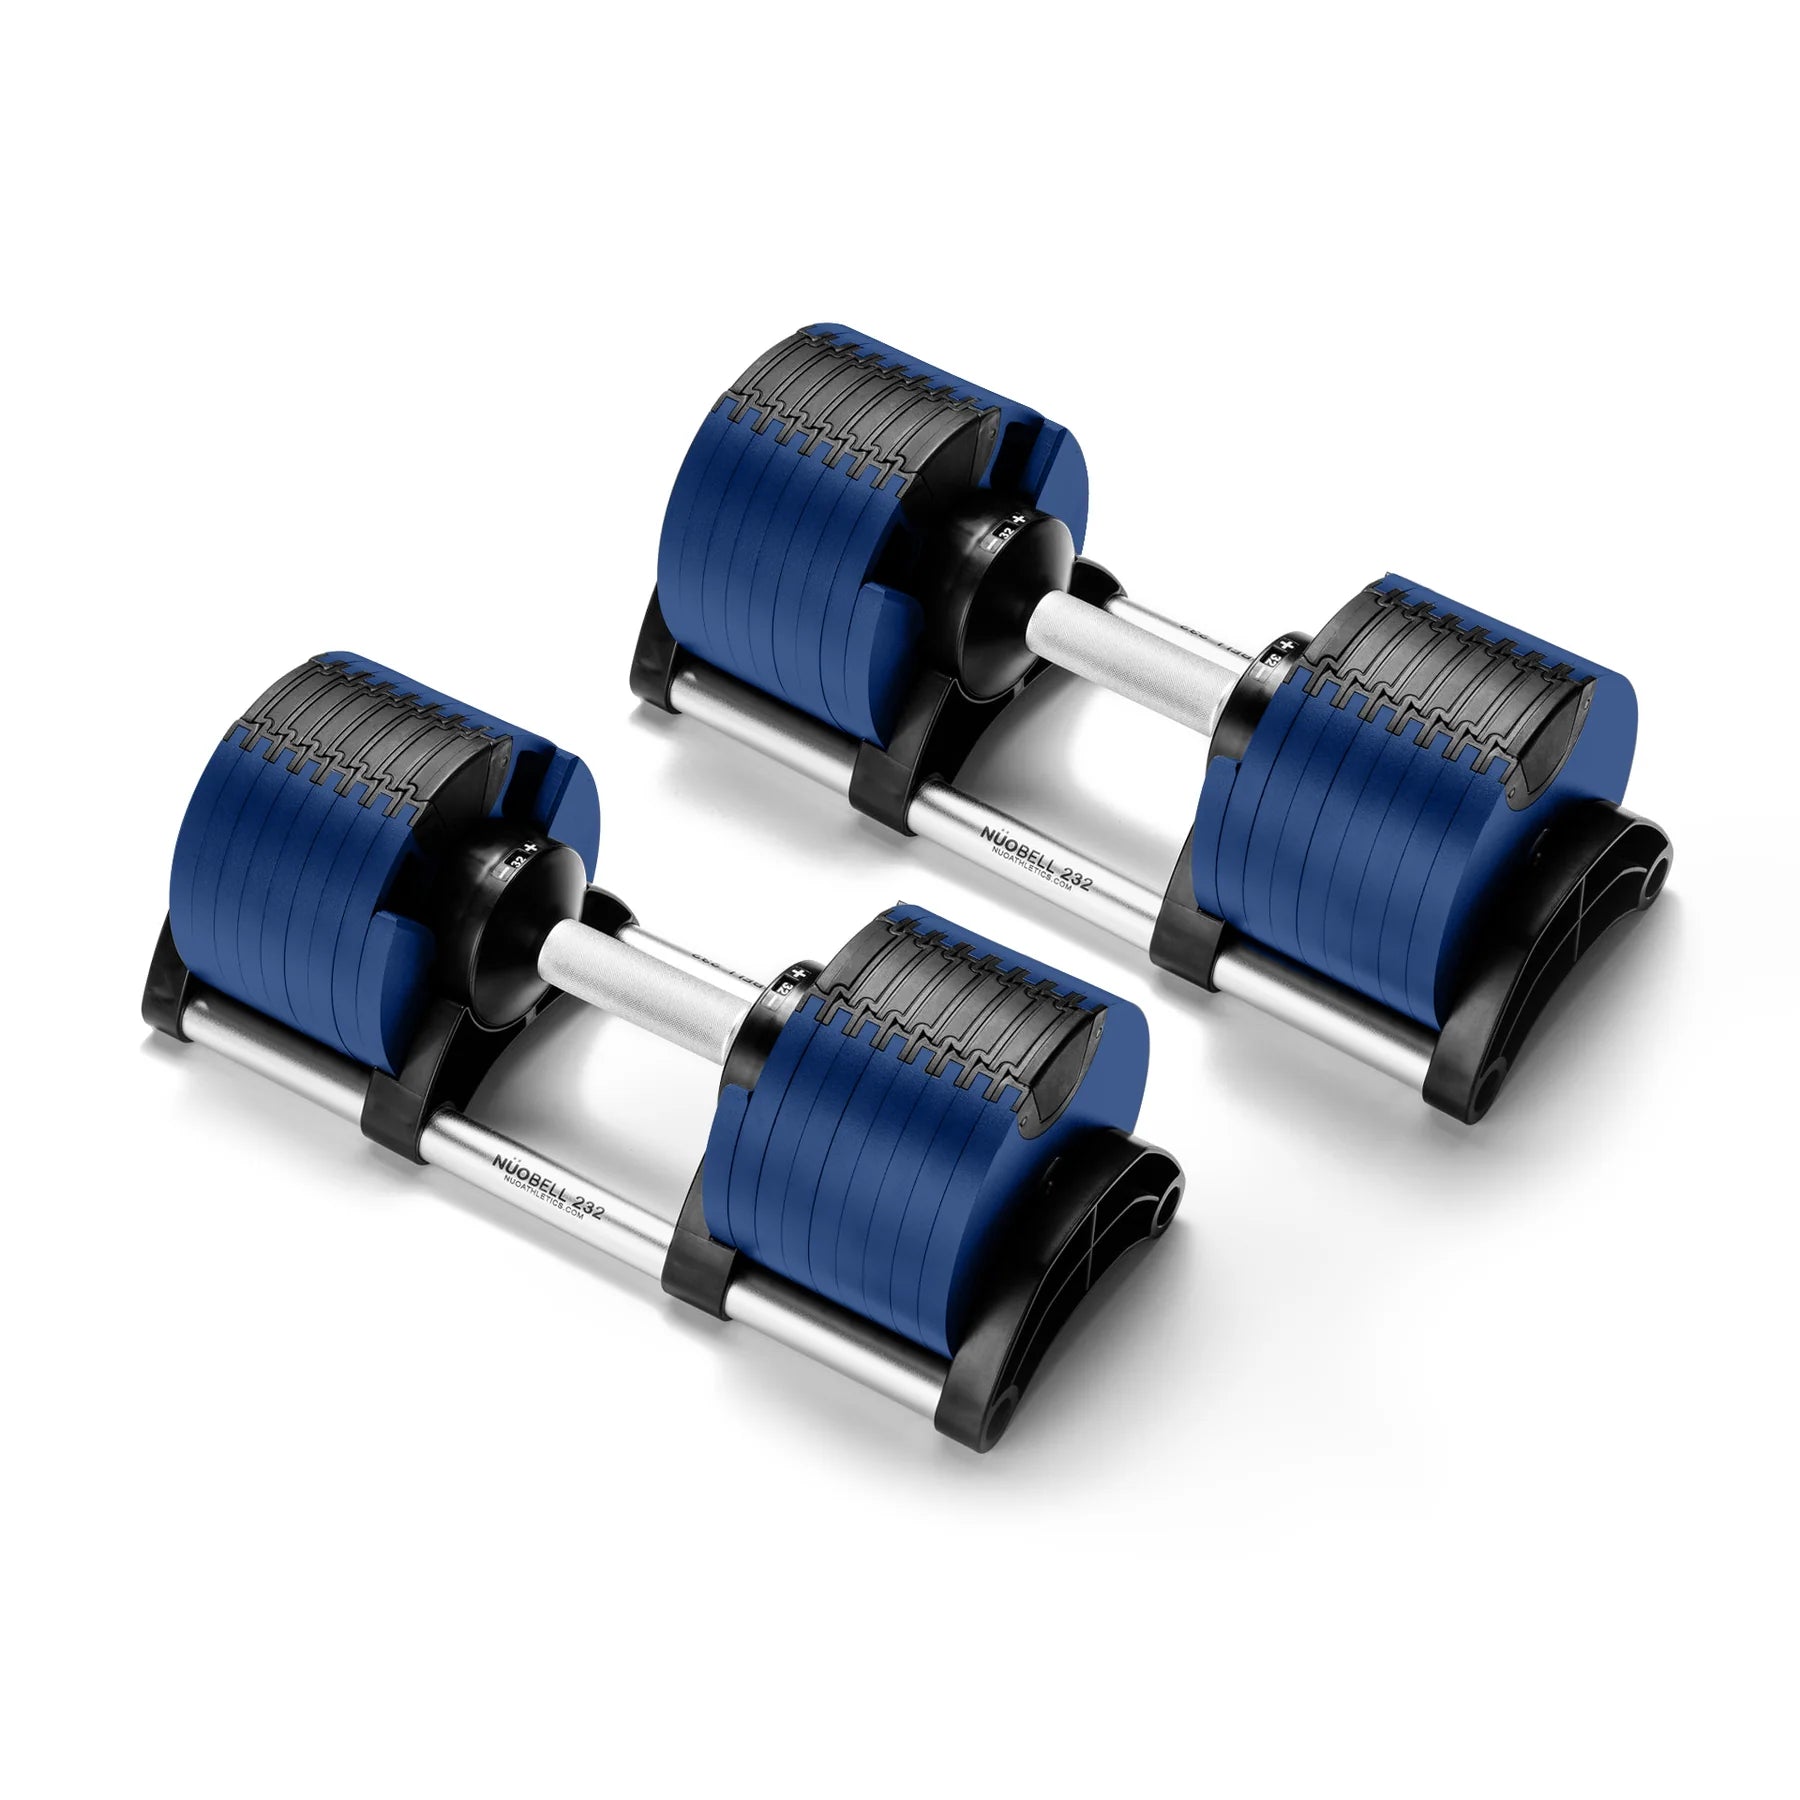 Bluelander Set of Weights for Exercise at Home, 8 Discs of Different  Weights, 4 Bars of 2 Different Longs, 2 Bar Locks, Exercise Weights, Weight  Kit, Adjustable Weights, Plates -  Canada